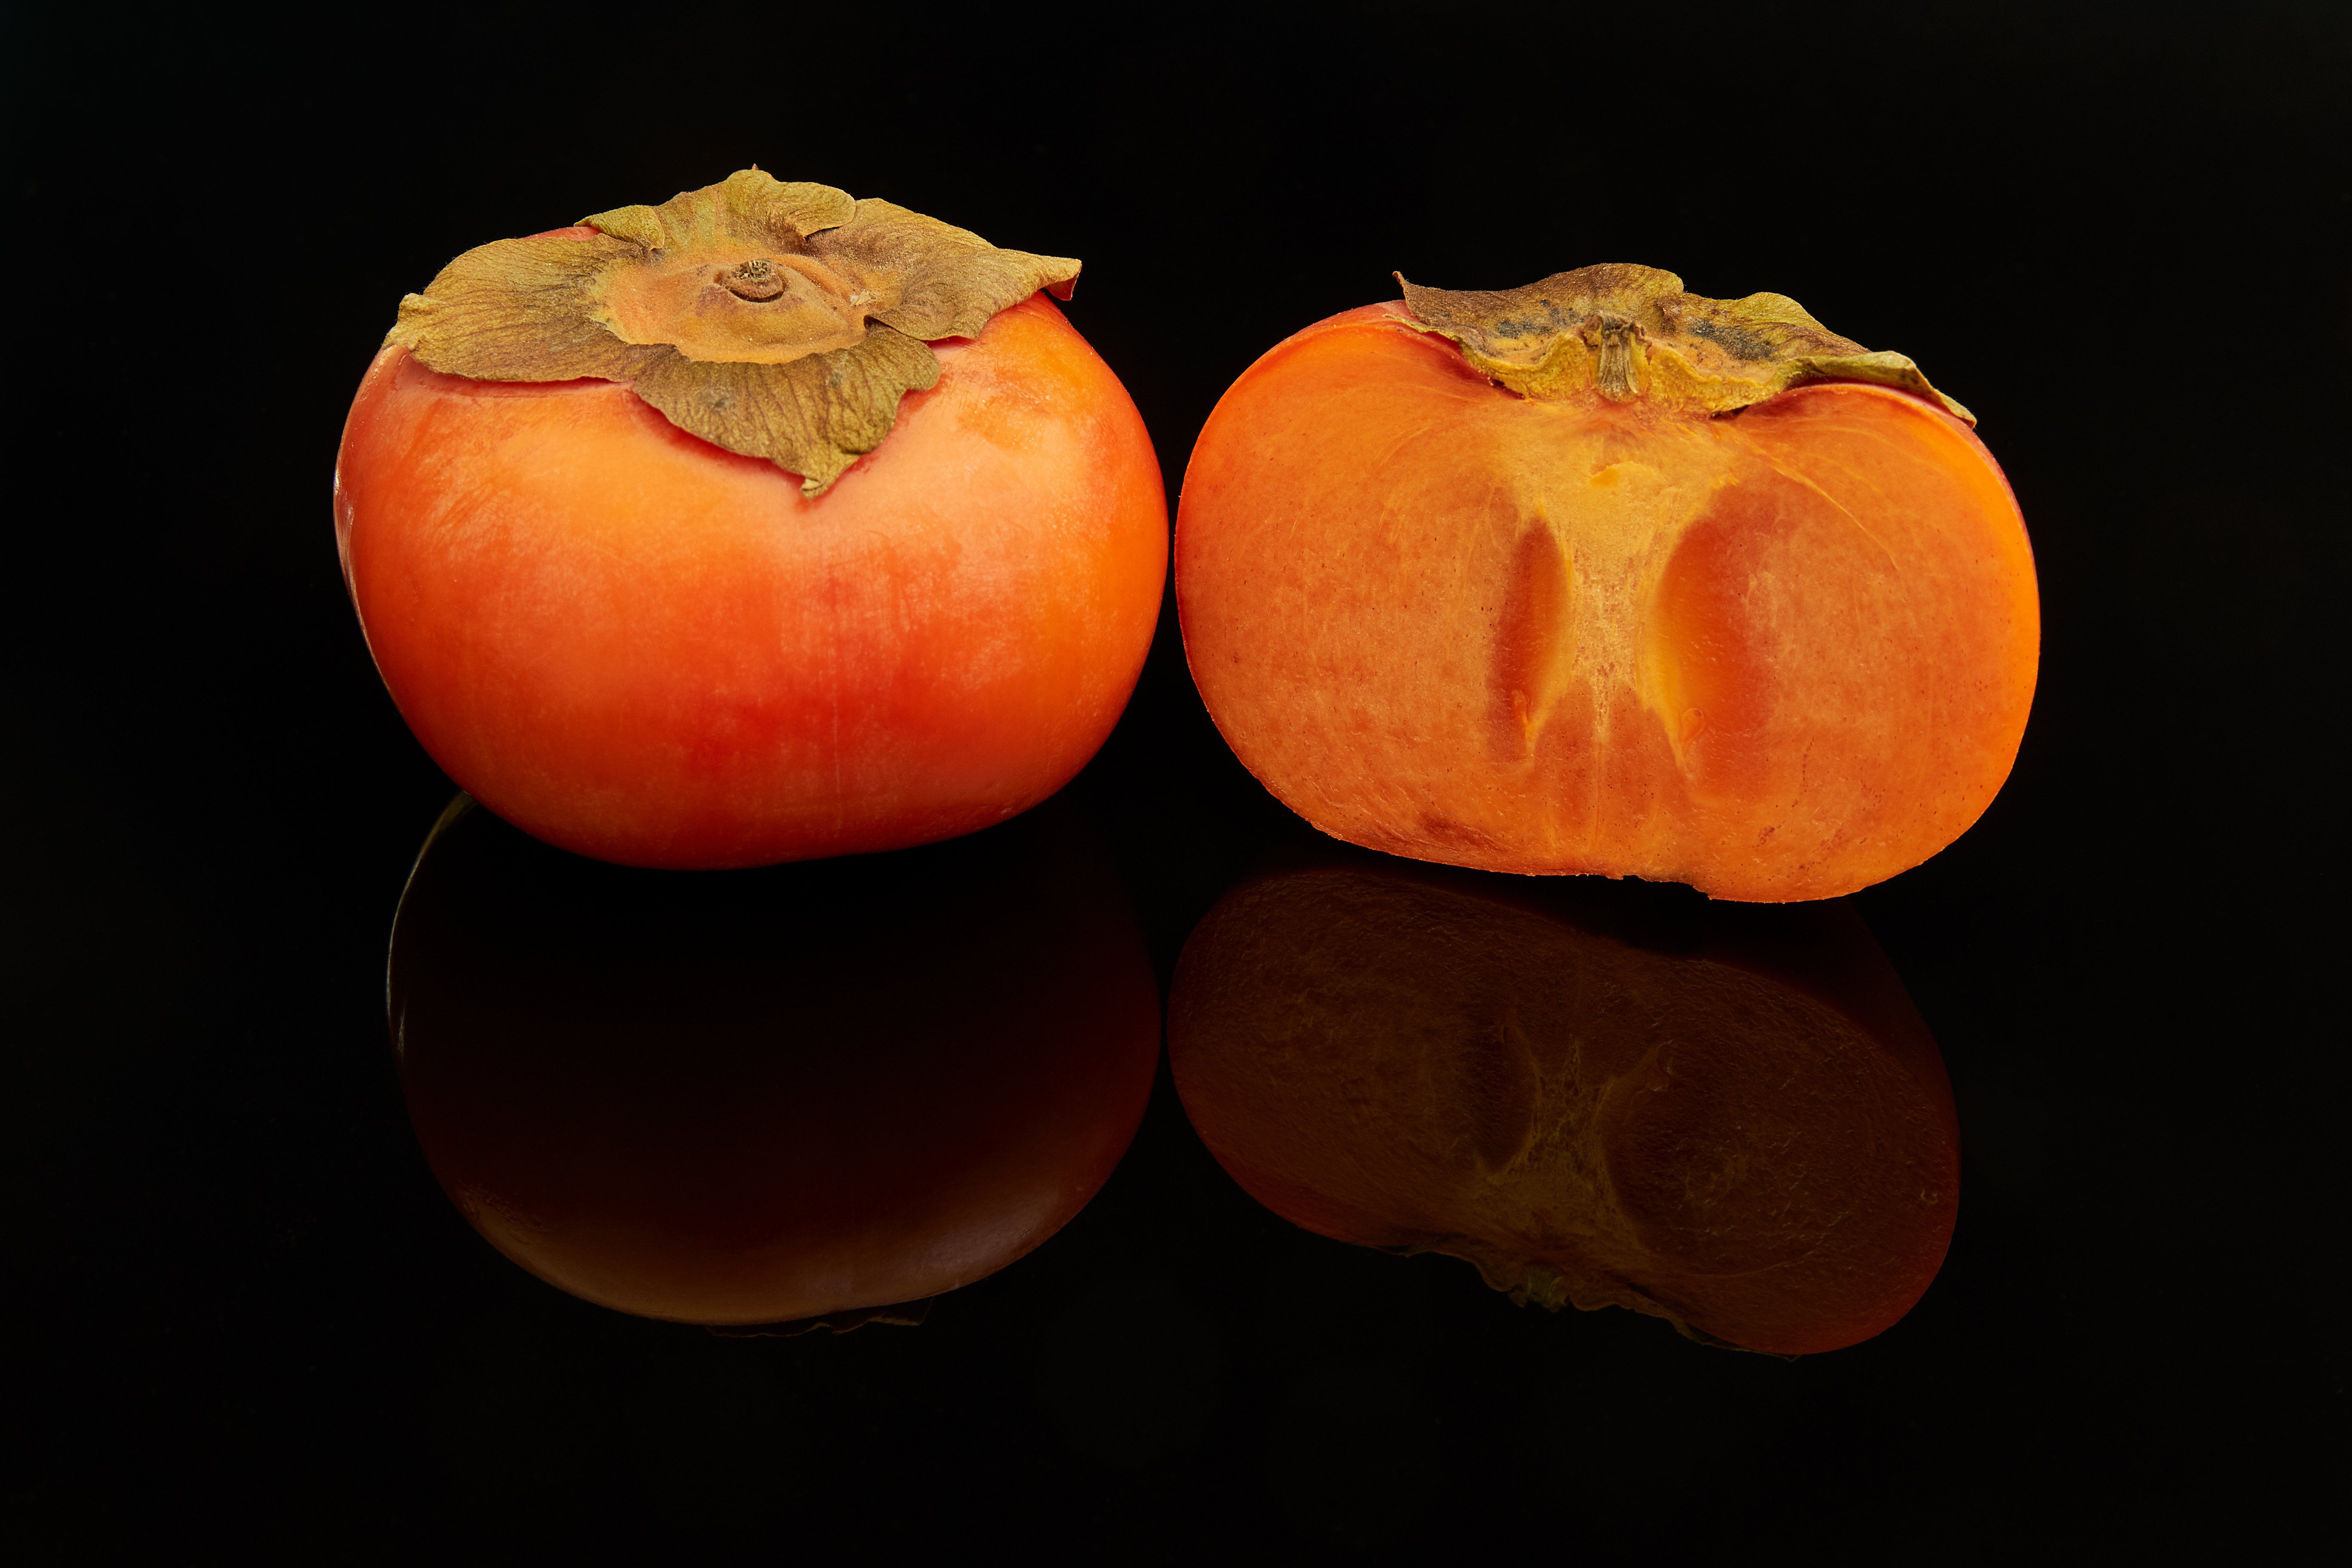 Asian persimmon production